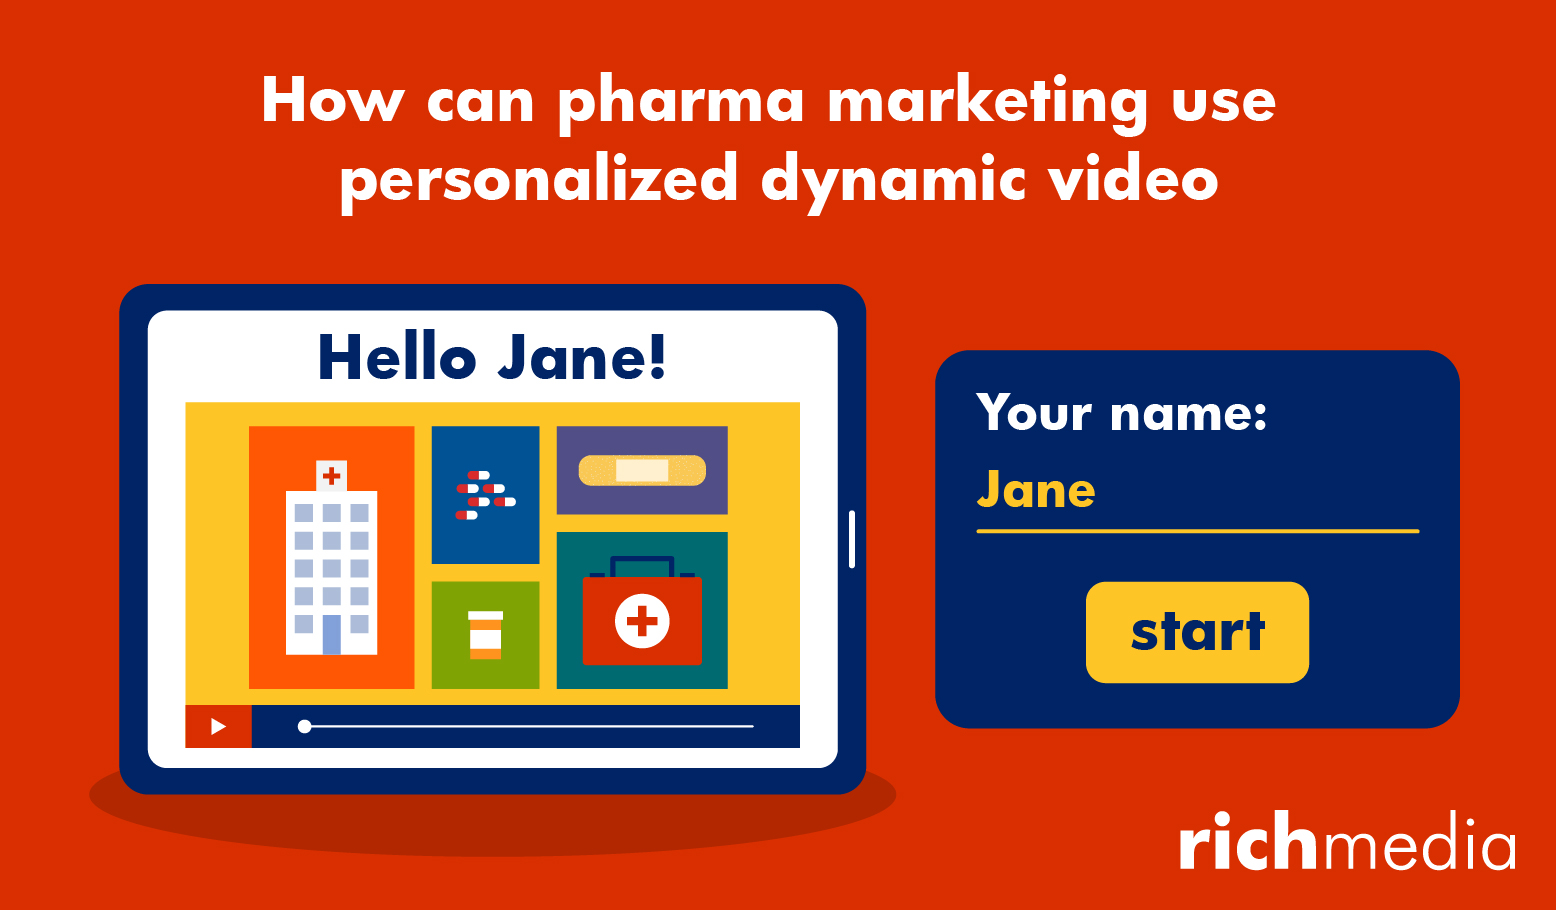 How Can Pharma Marketing Use Personalized Dynamic Video?